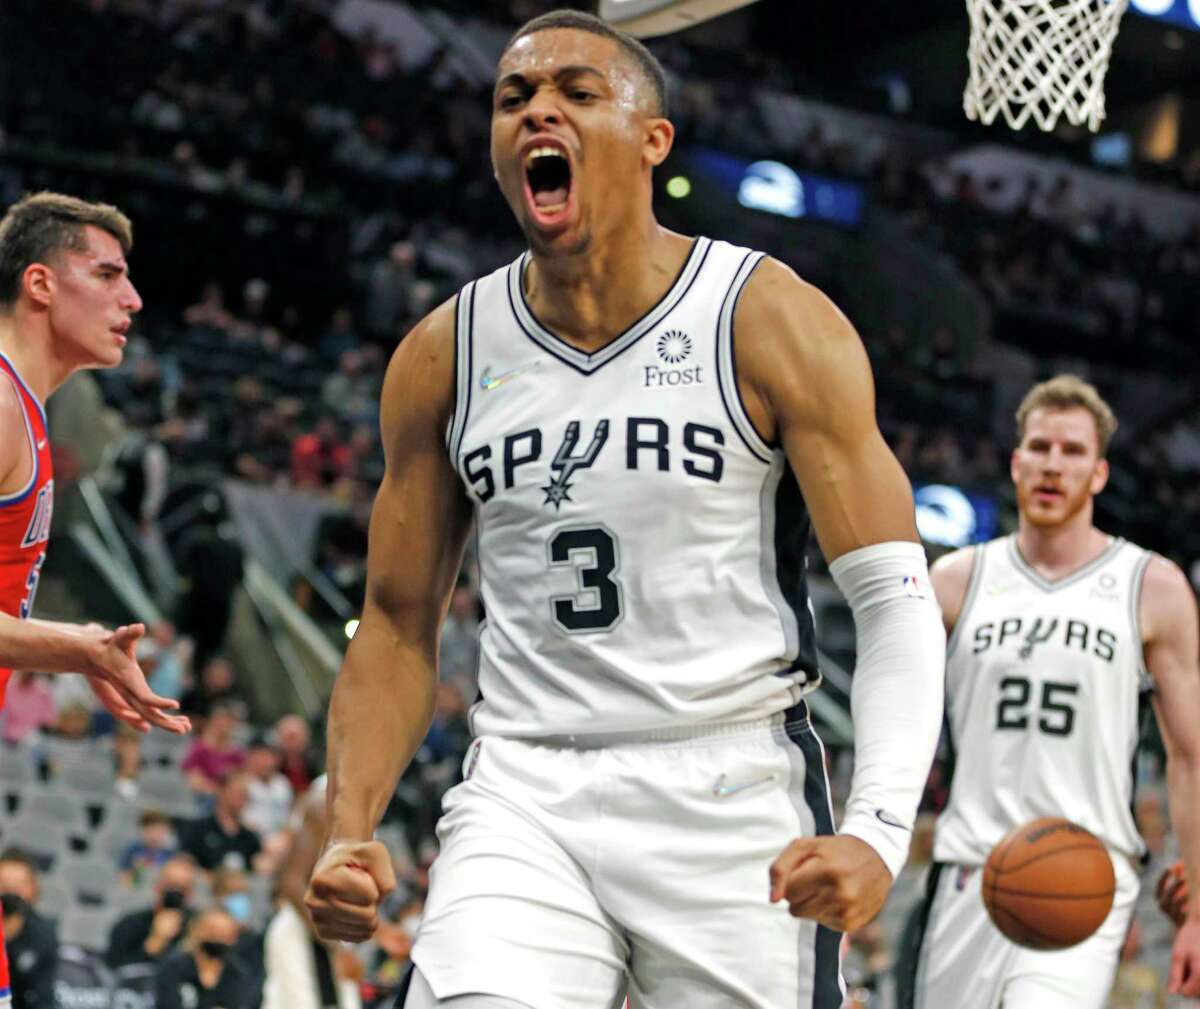 The Spurs’ Keldon Johnson reacts after a dunk in first half against the Pistons on Sunday, Dec. 26, 2021, at the AT&T Center.